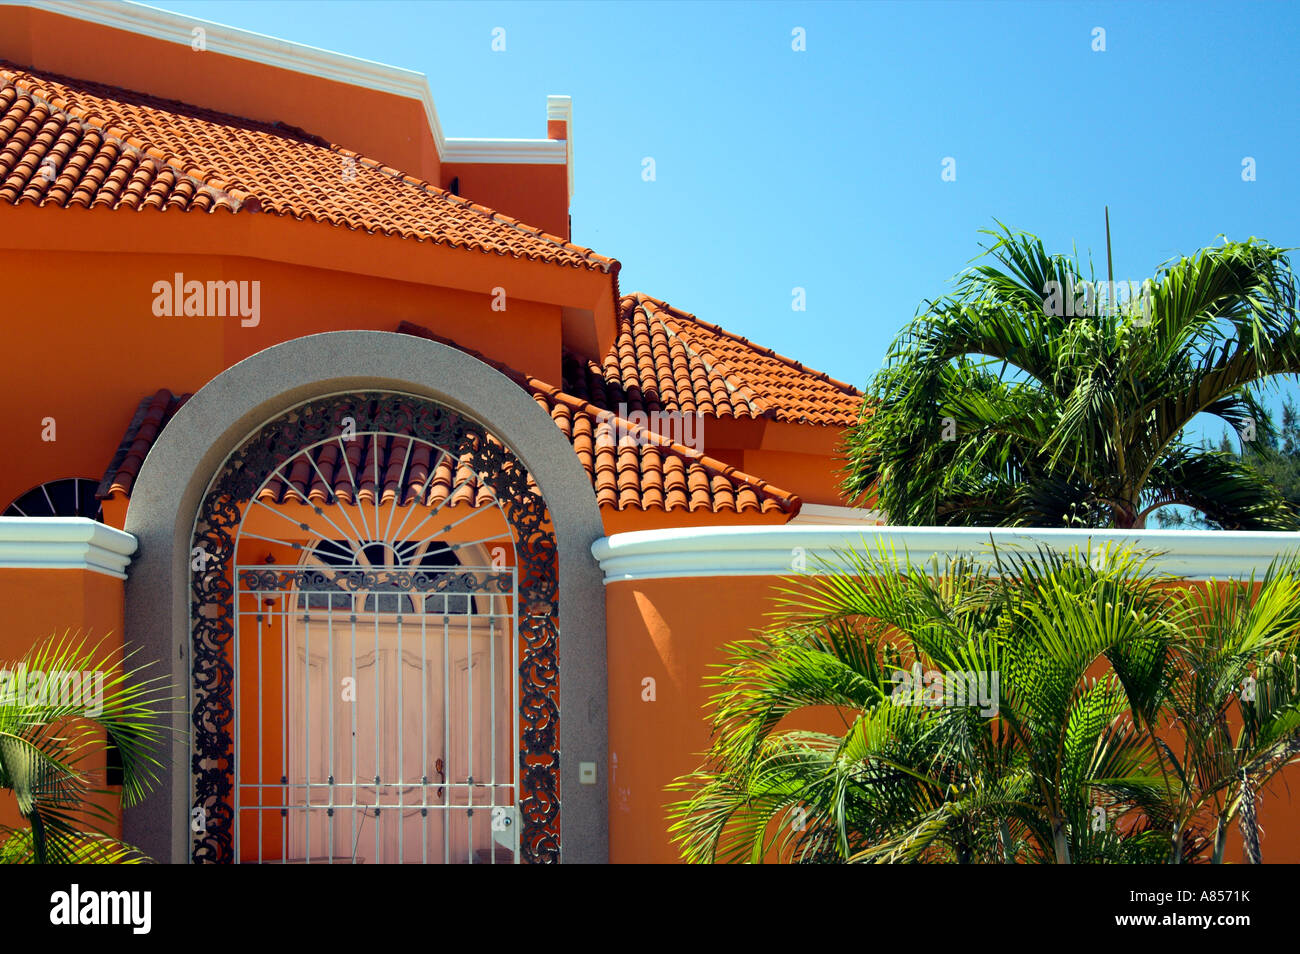 Homes with typical Mexican Spanish design in Mazatlan Mexico Stock Photo